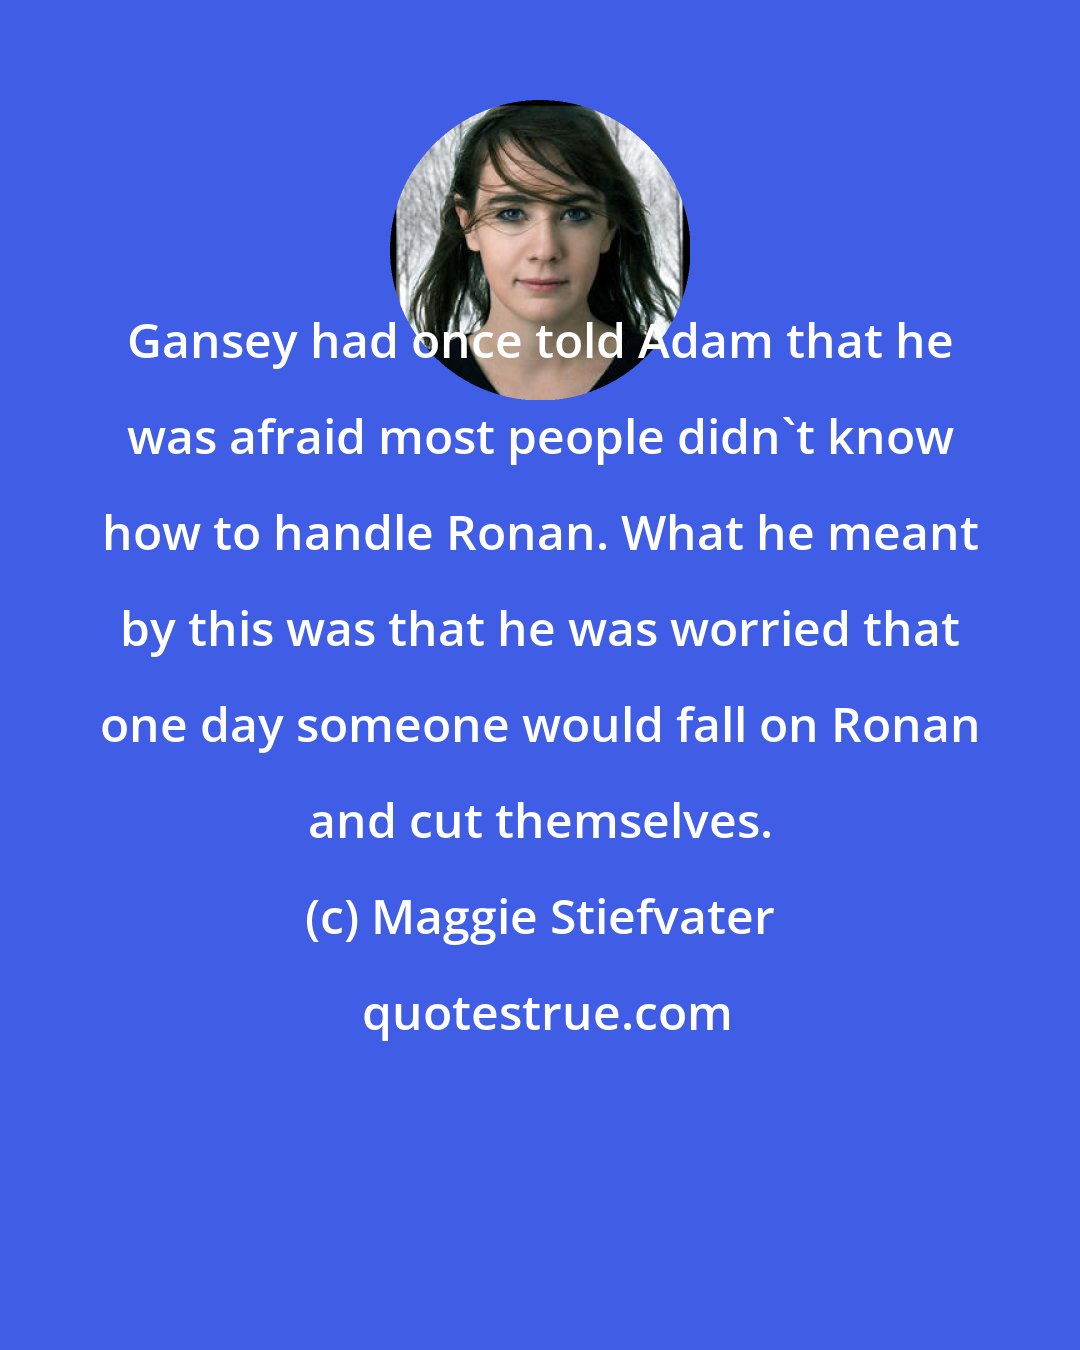 Maggie Stiefvater: Gansey had once told Adam that he was afraid most people didn't know how to handle Ronan. What he meant by this was that he was worried that one day someone would fall on Ronan and cut themselves.